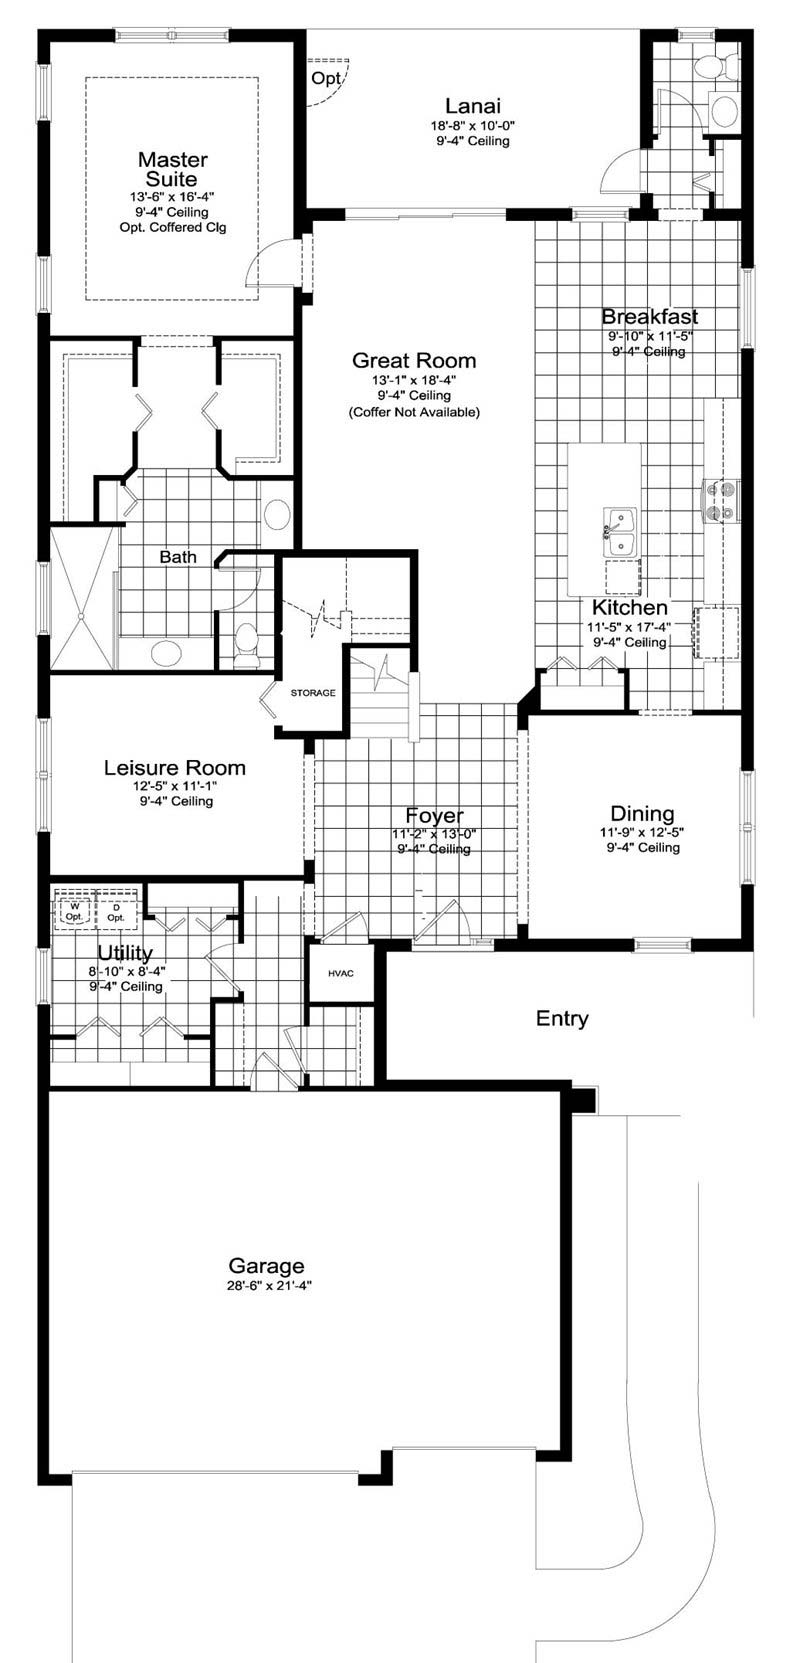 Silver Mist 3 Floor Plan in Canopy, Naples by Neal Communities, 4 Bedrooms, 3.5 Bathrooms, 3 Car garage, 2,913 Square feet, 2 Story home